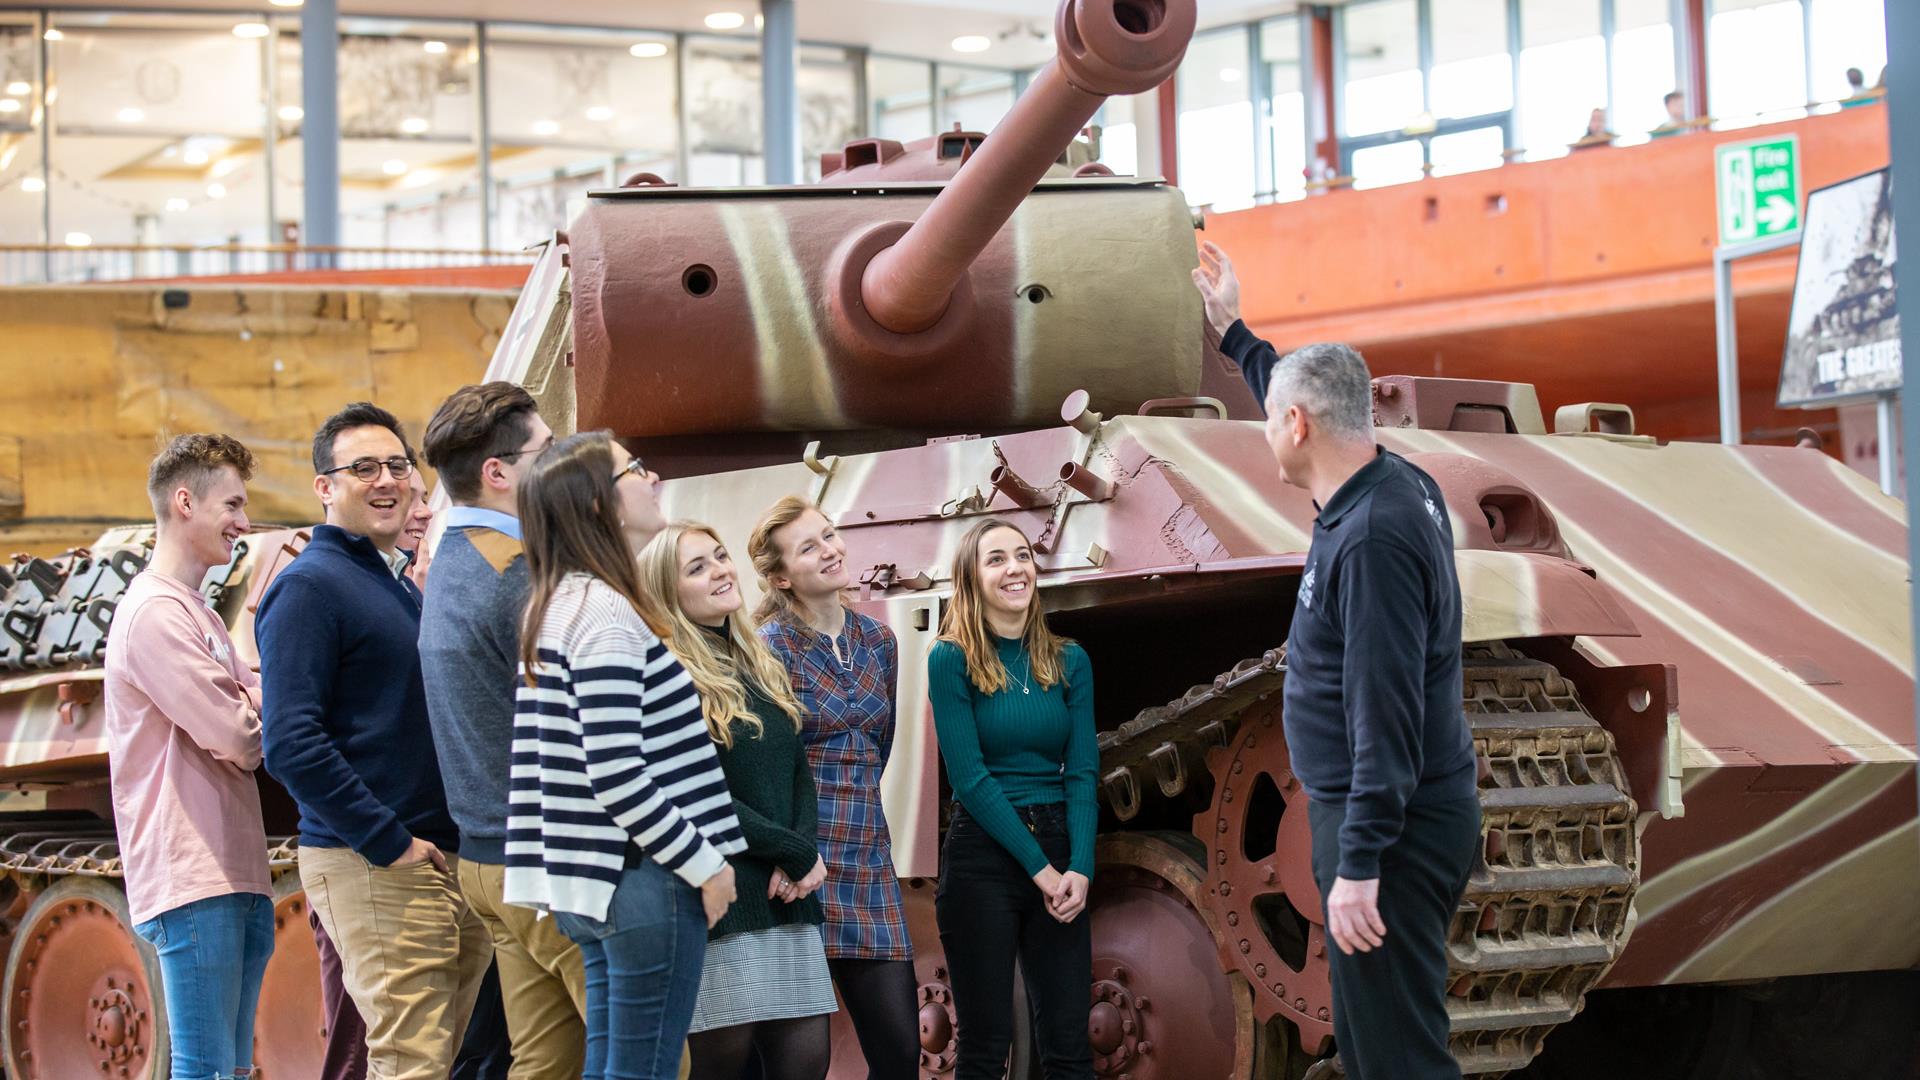 Man giving tour and talk about Tanks in museum